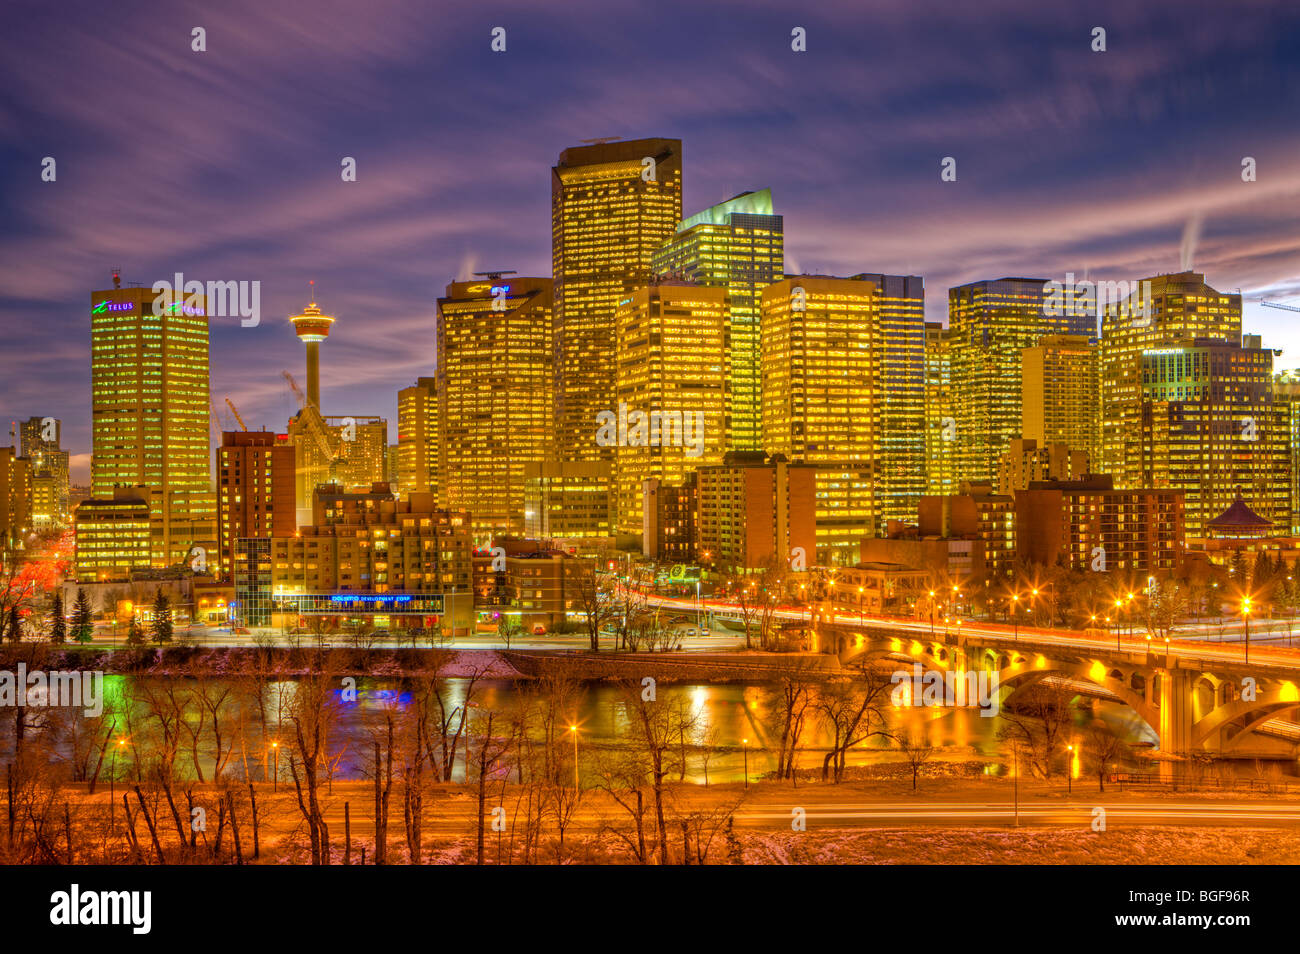 Calgary skyline of high-rise buildings, the Calgary Tower, and the Centre Street Bridge spanning the Bow River at dusk after lig Stock Photo